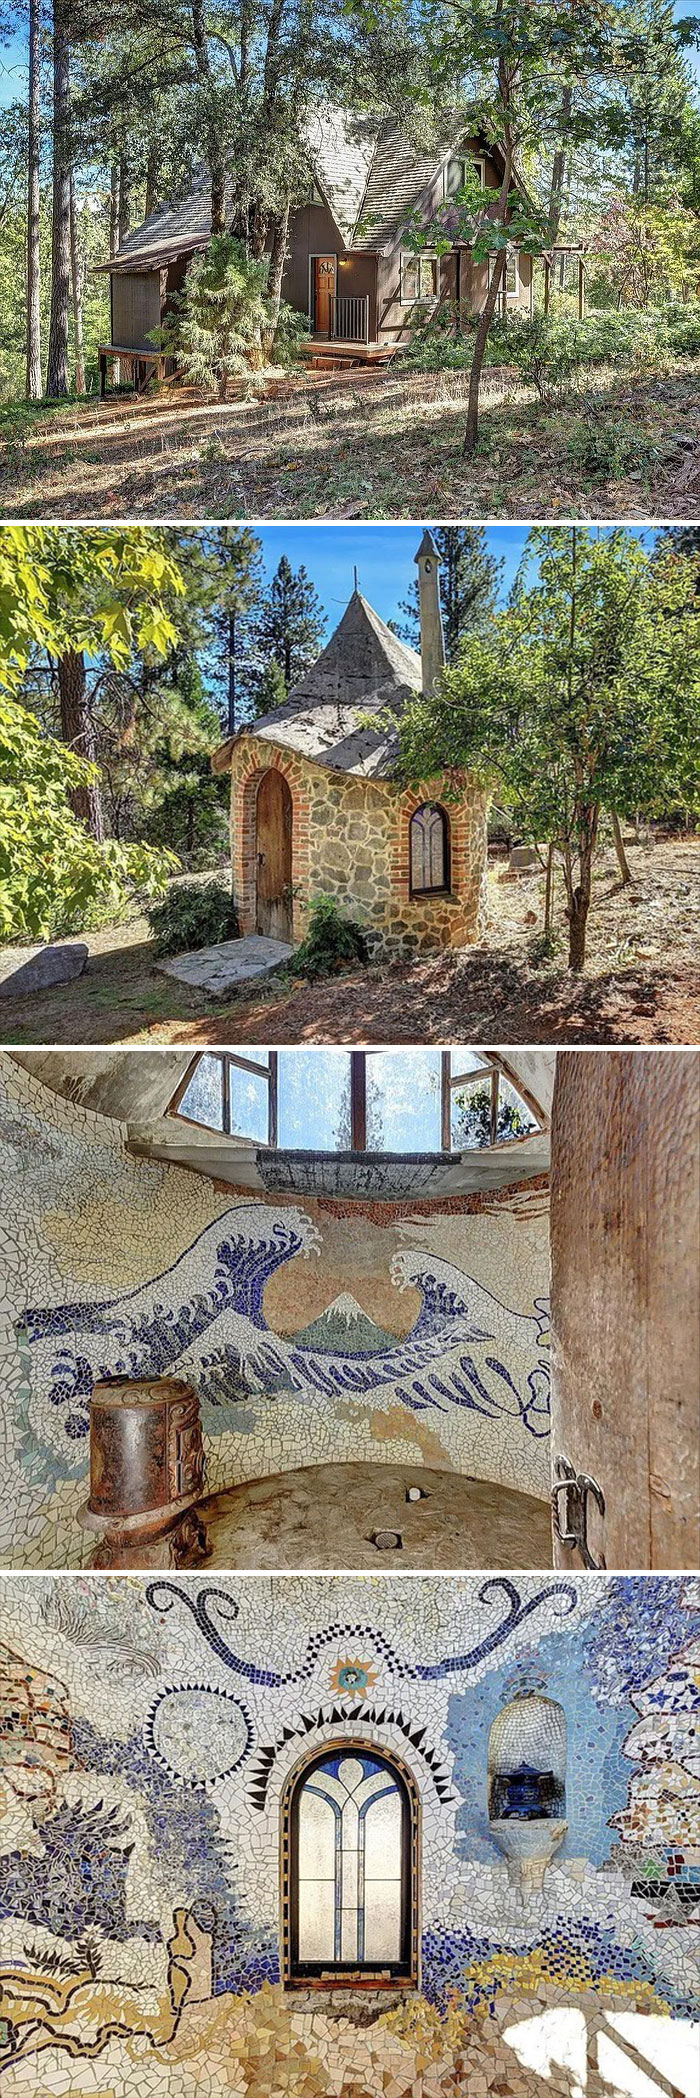 Please Enjoy This Cabin In The Ca Woods With It's Separate Bath House - All Tiled To Perfection